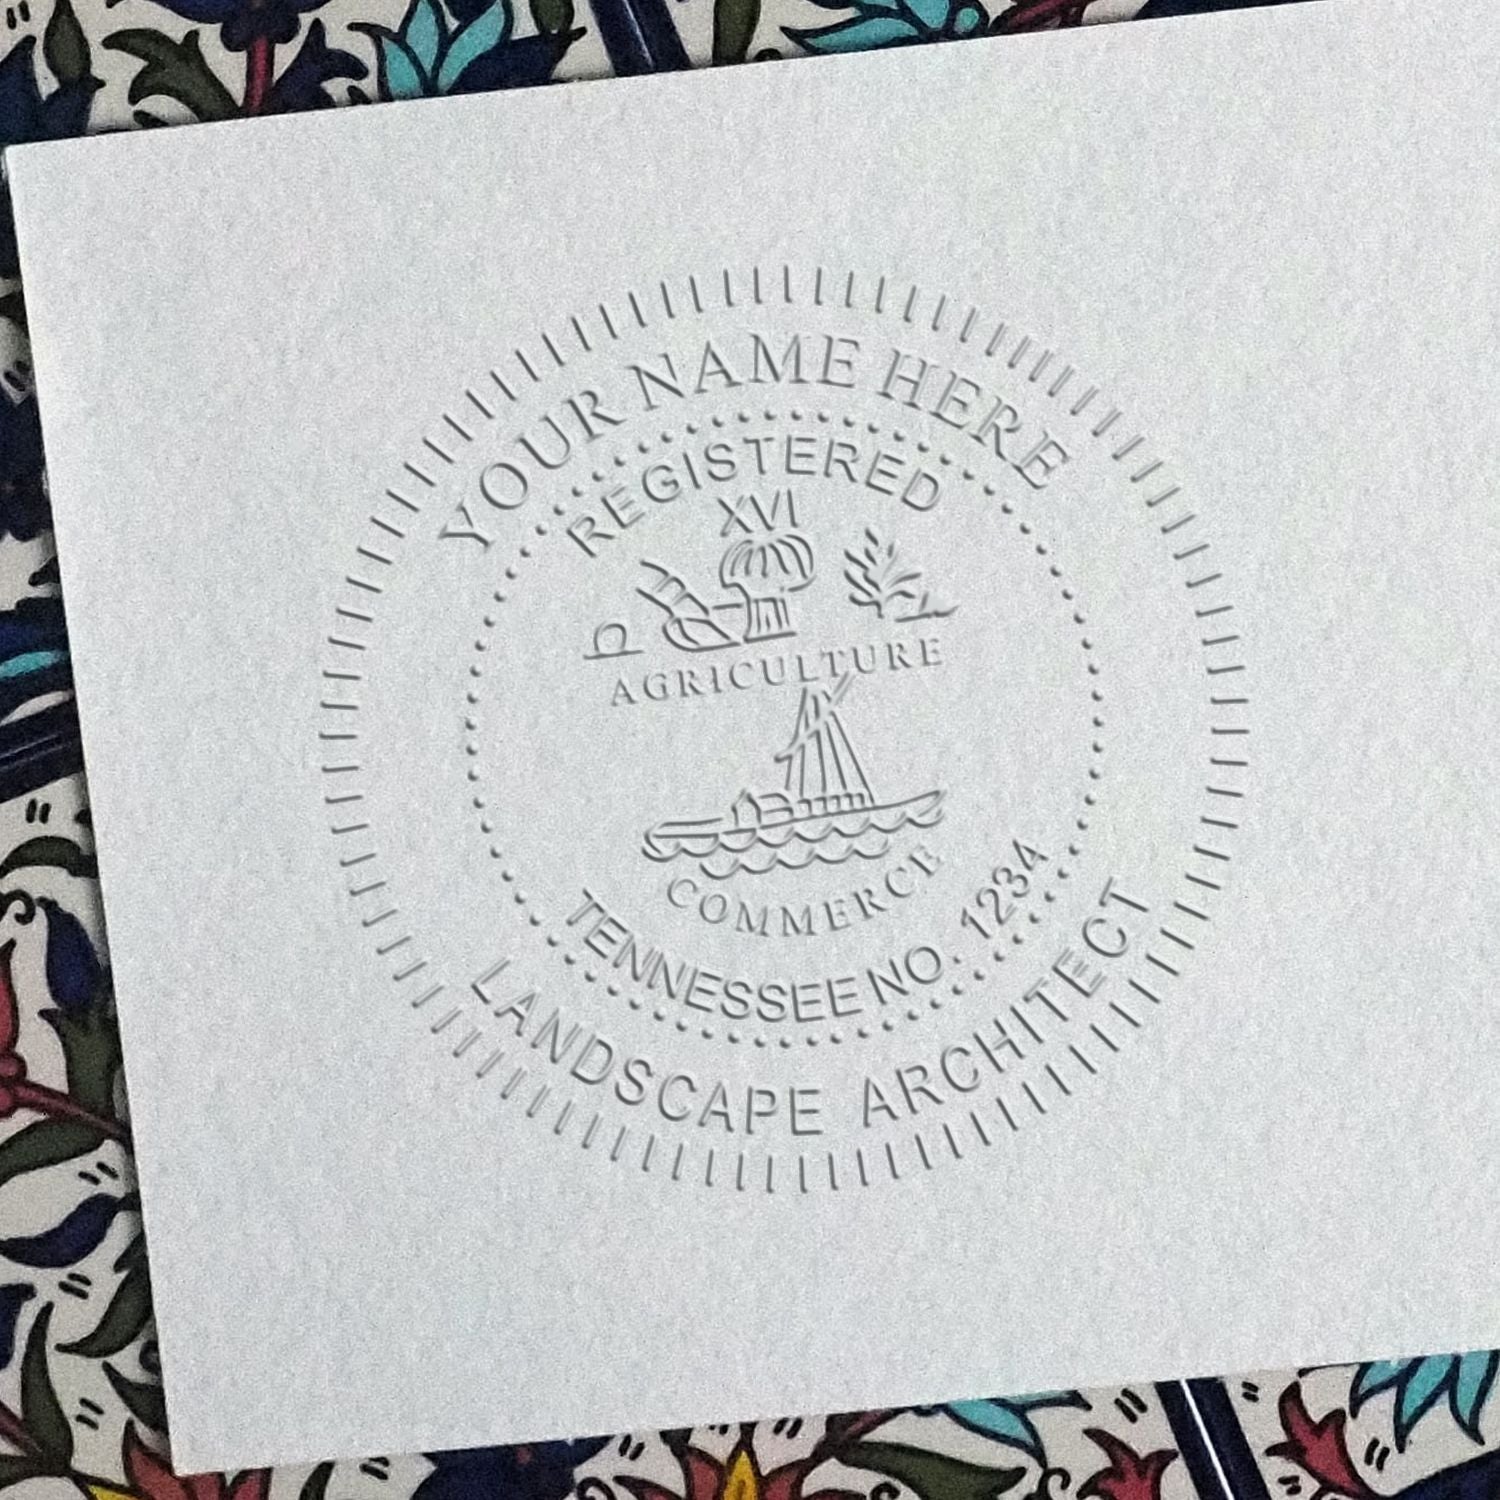 An alternative view of the Heavy Duty Tennessee Landscape Architect Cast Iron Embosser stamped on a sheet of paper showing the image in use